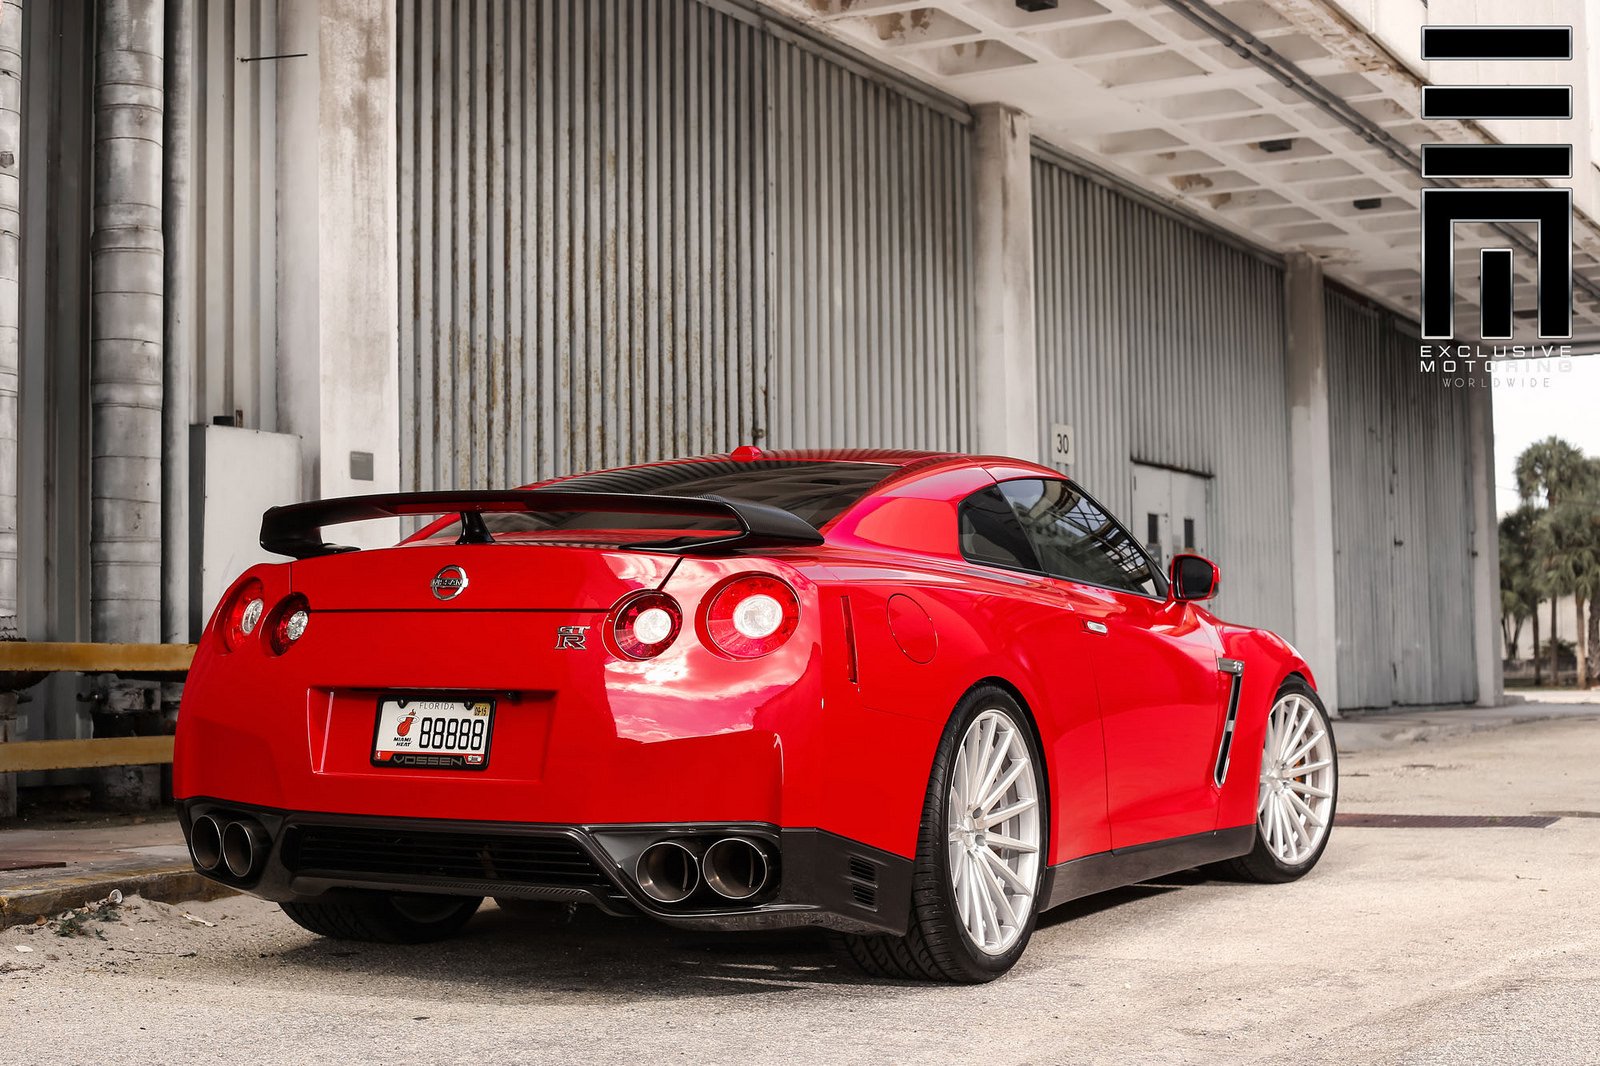 nissan, Gtr, Cars, Coupe, Red, Vossen, Wheels, Modified Wallpaper